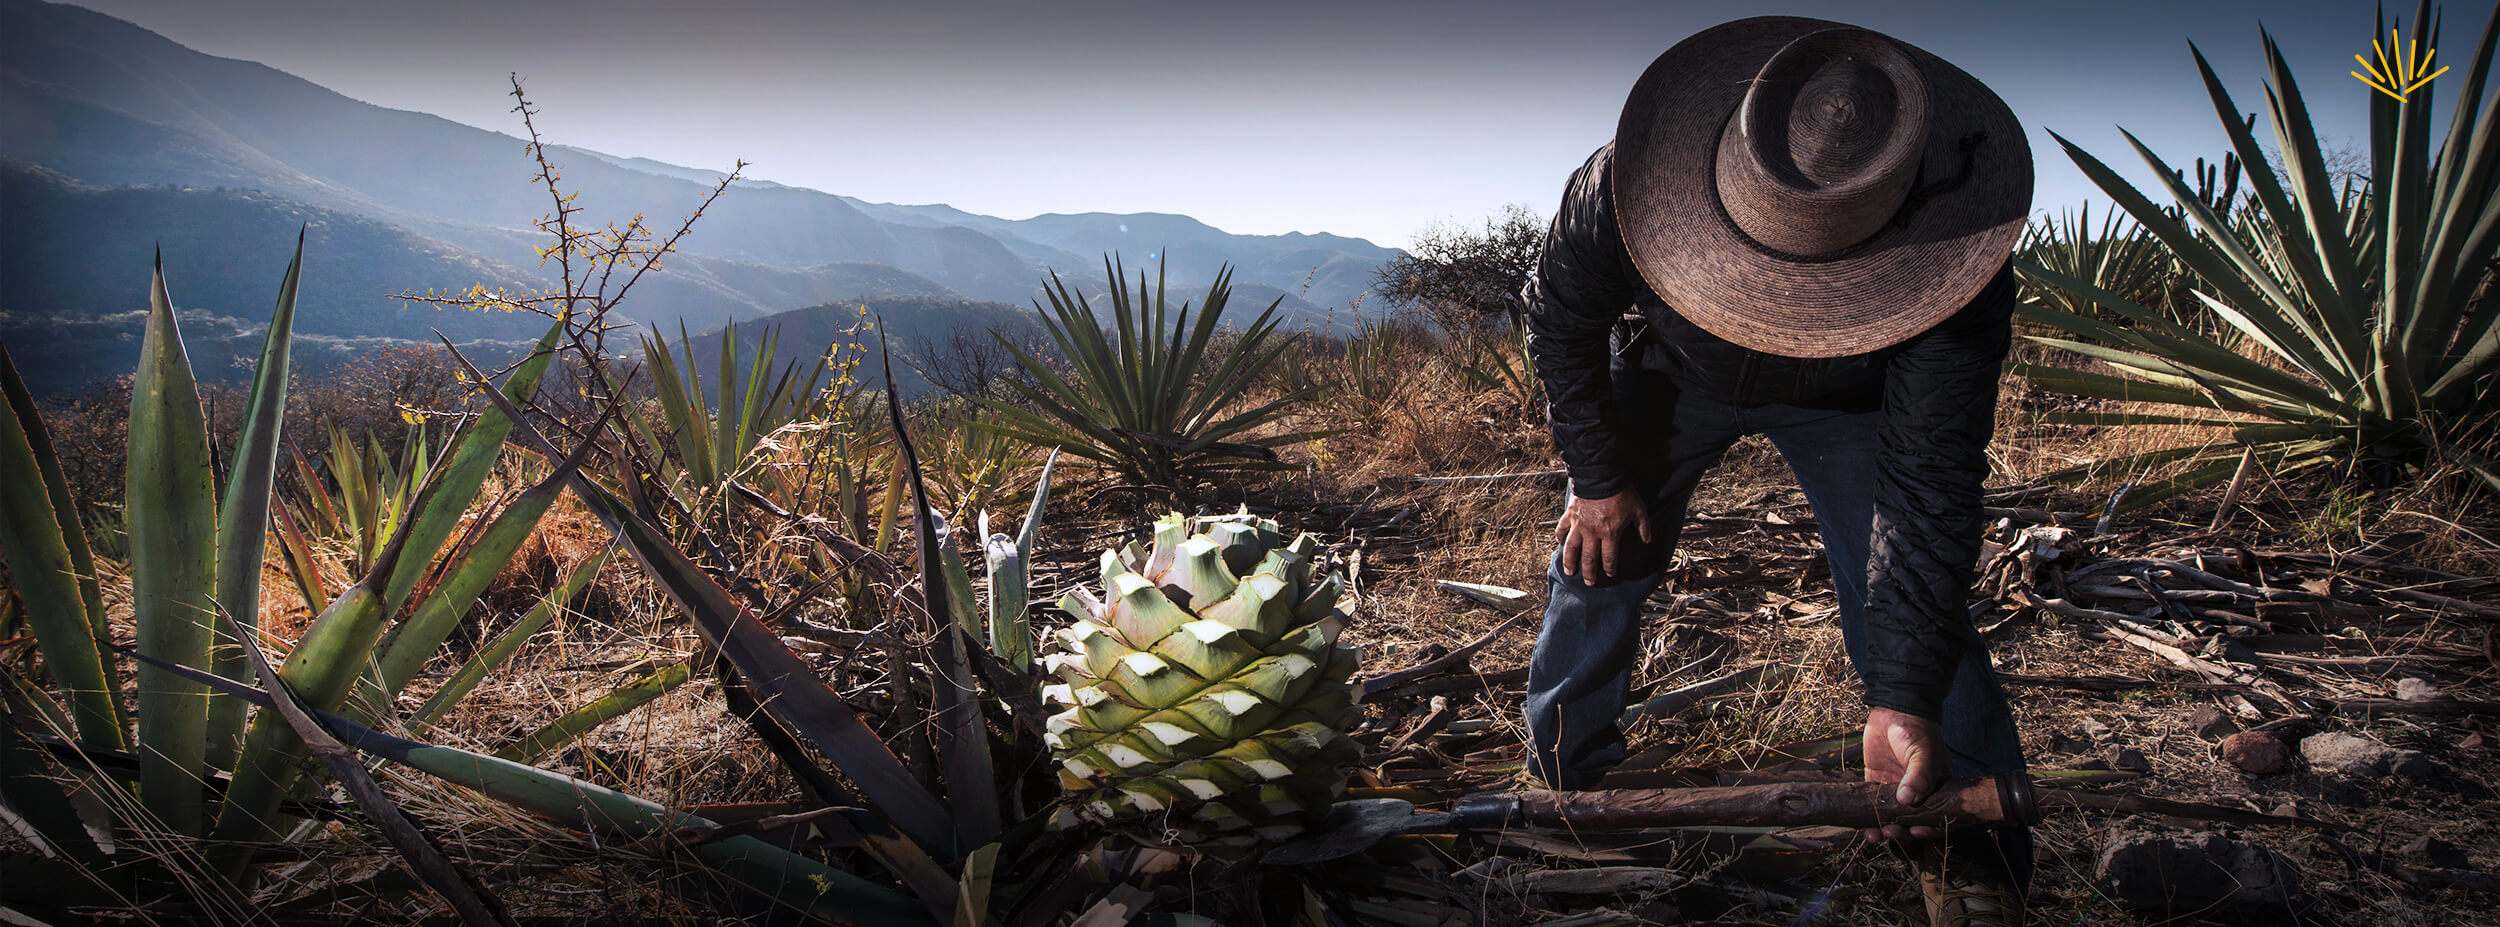 Mezcal, one of the world’s most complex distillates